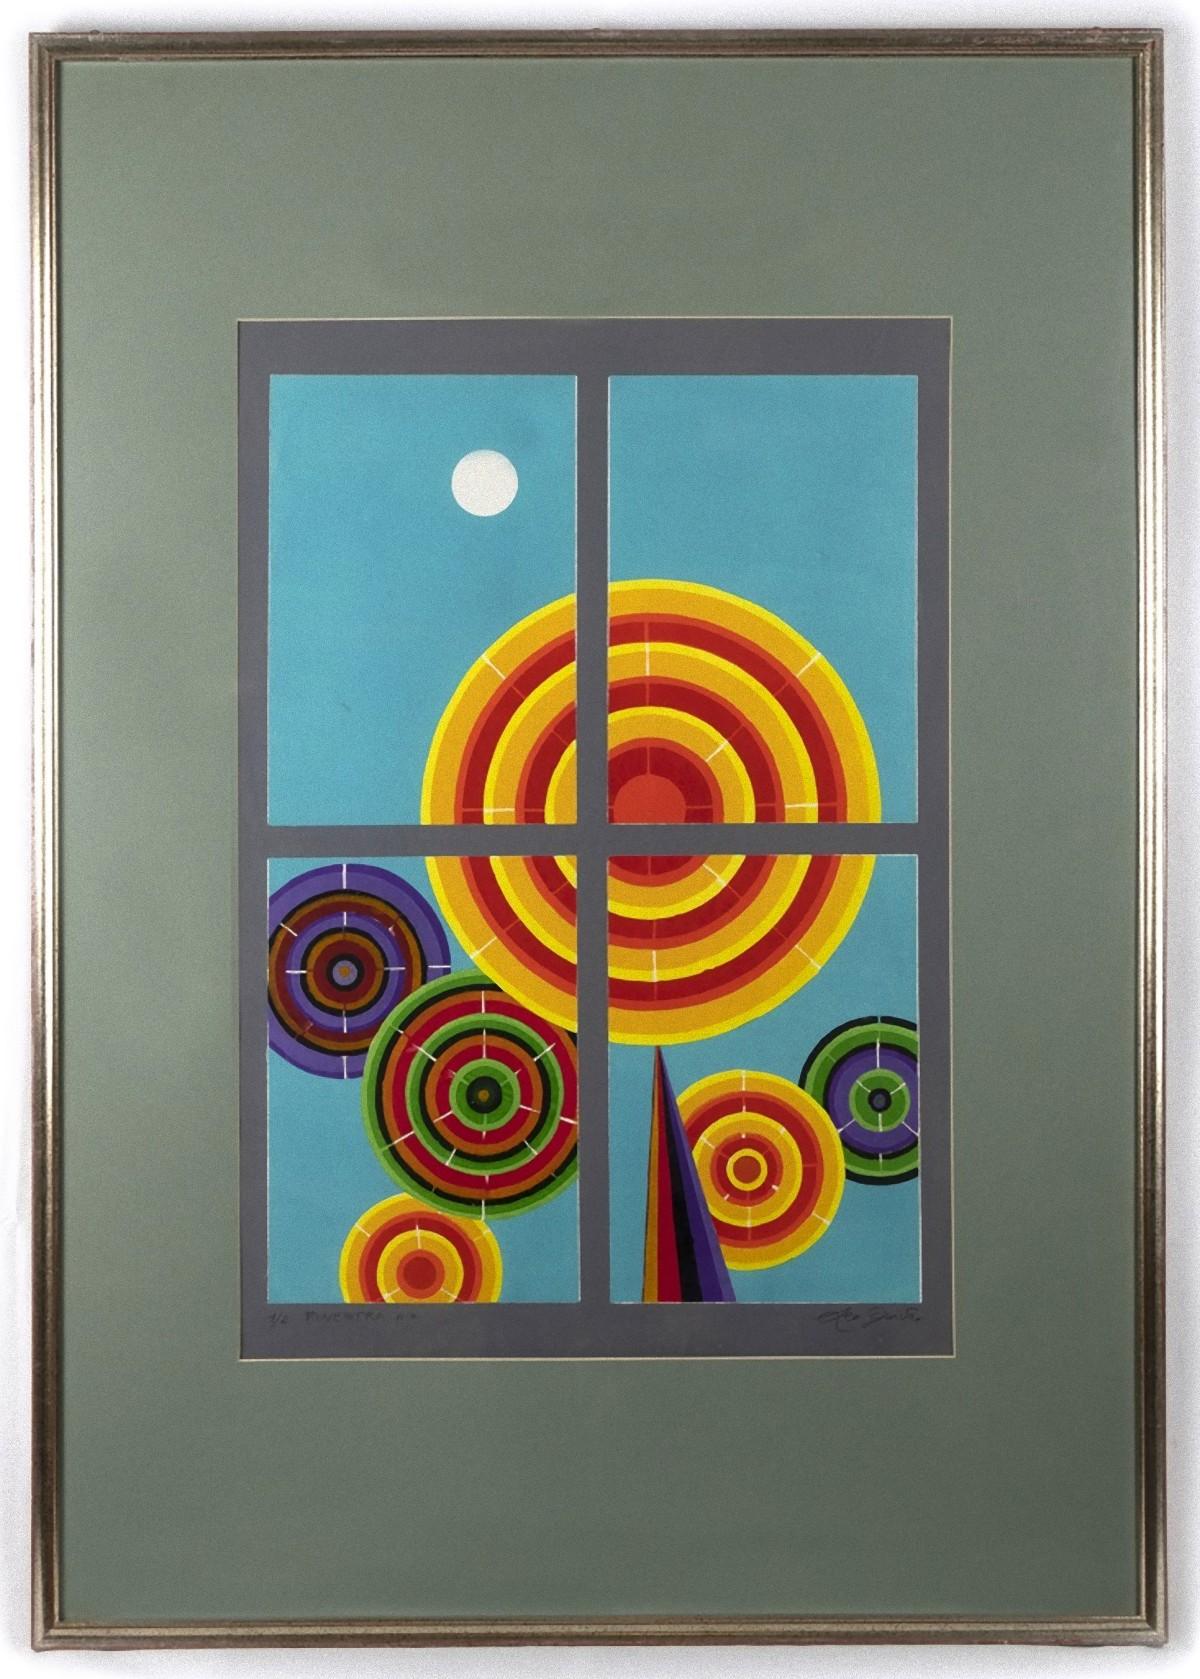 Window 1 is an original Contemporary artwork realized in 1995 by the italian artist Leo Guida (1992 - 2017).

Original Screen Print and Chalcography.

Numbered Titled and Hand-signed in pencil on the lower margin: 1/2 FINESTRA p.a. (Artist proof)